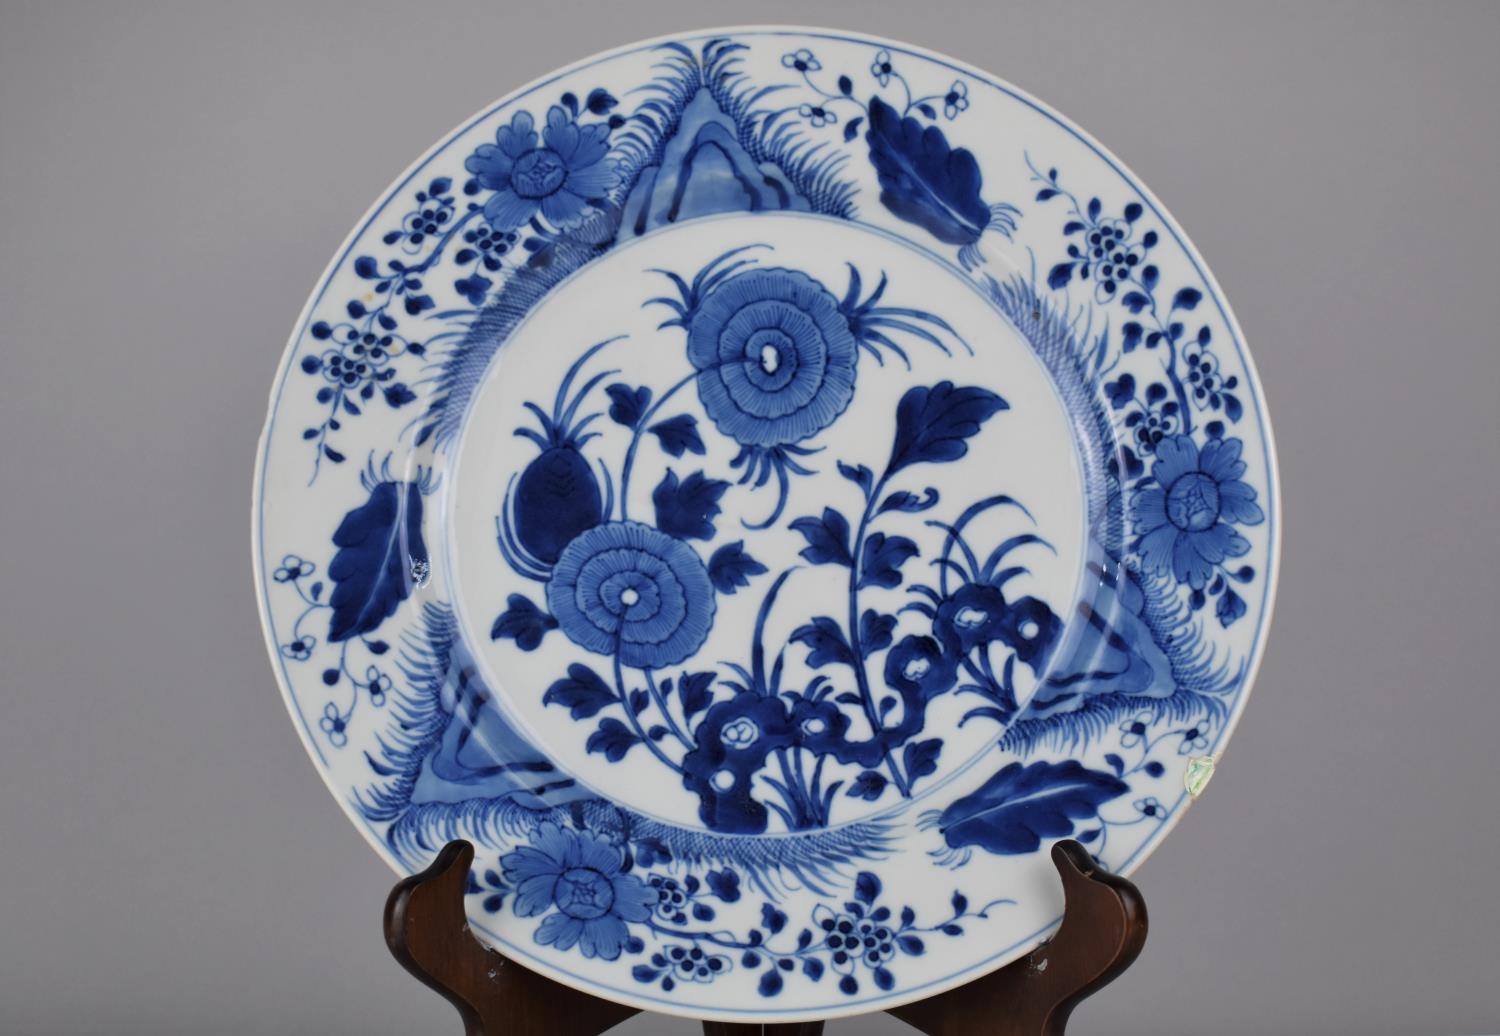 A 19th Century Chinese Porcelain Blue and White Plate Decorated in a Floral Motif, the back with - Image 2 of 4